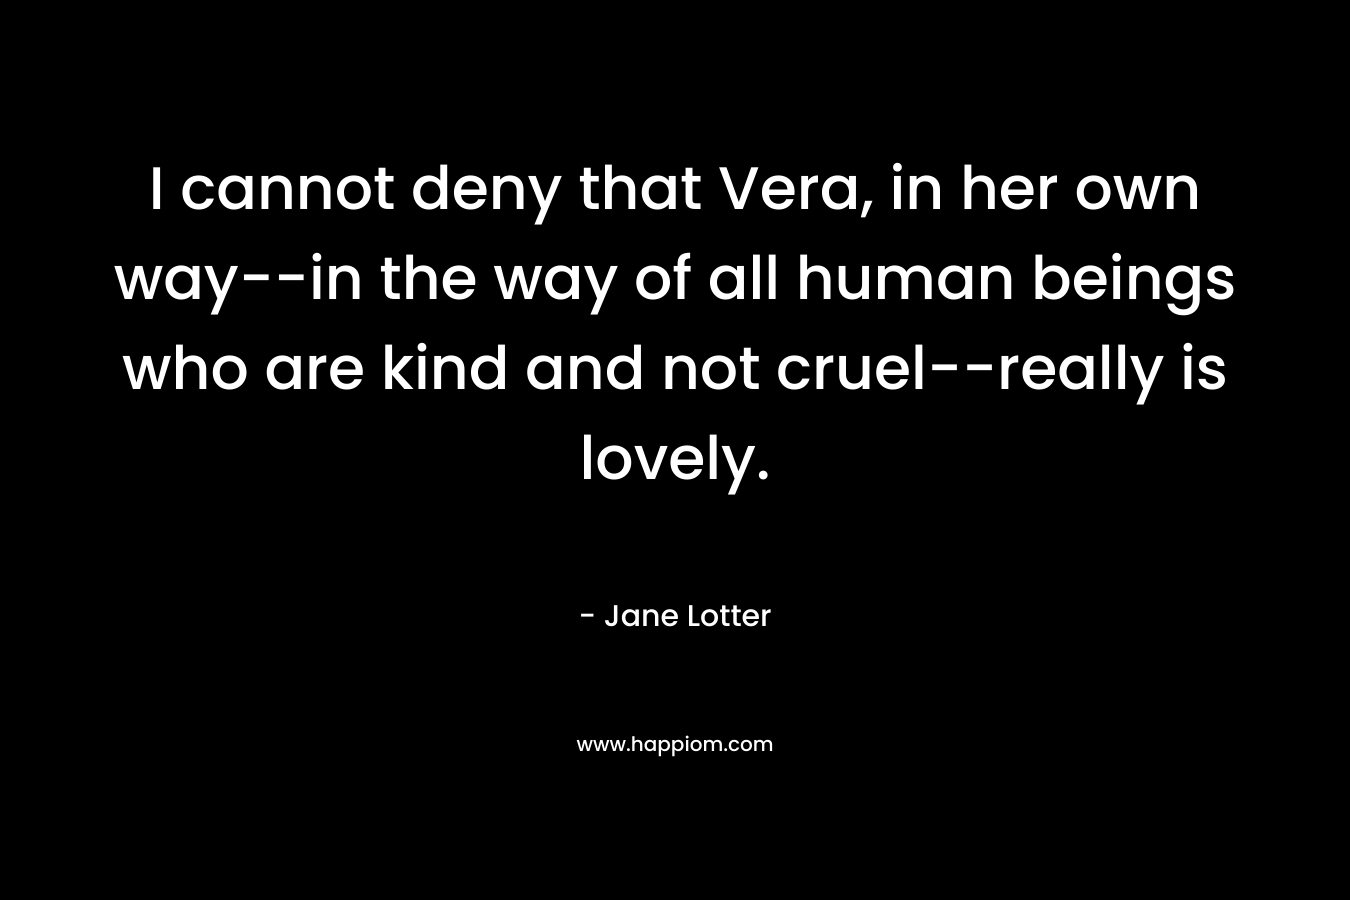 I cannot deny that Vera, in her own way–in the way of all human beings who are kind and not cruel–really is lovely. – Jane Lotter